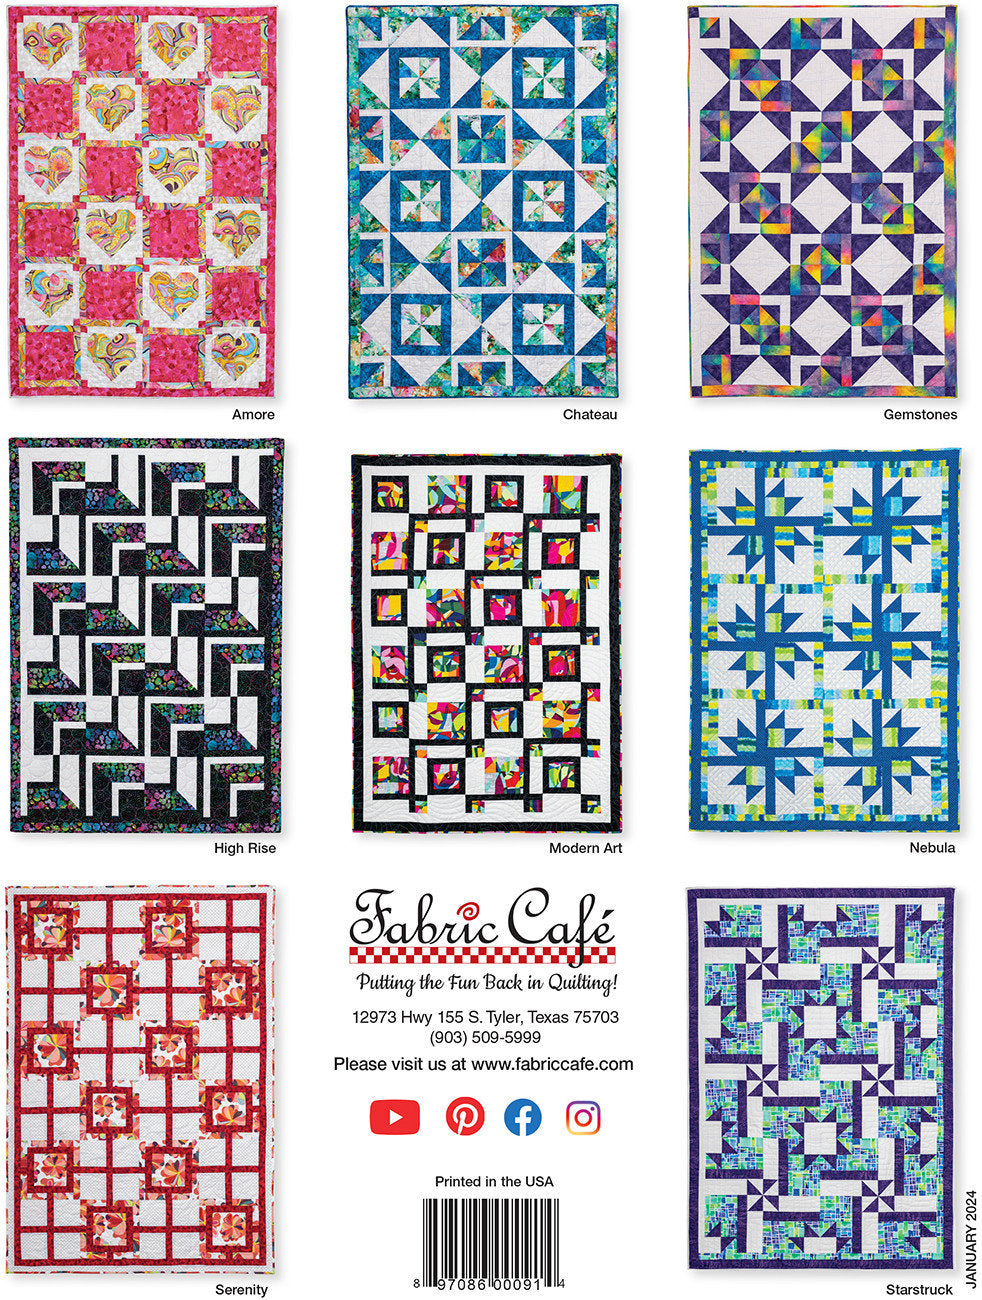 Go Bold with 3 Yard Quilts Pattern Booklet - Fran Morgan - Fabric Cafe' - 3 Size Options Per Pattern